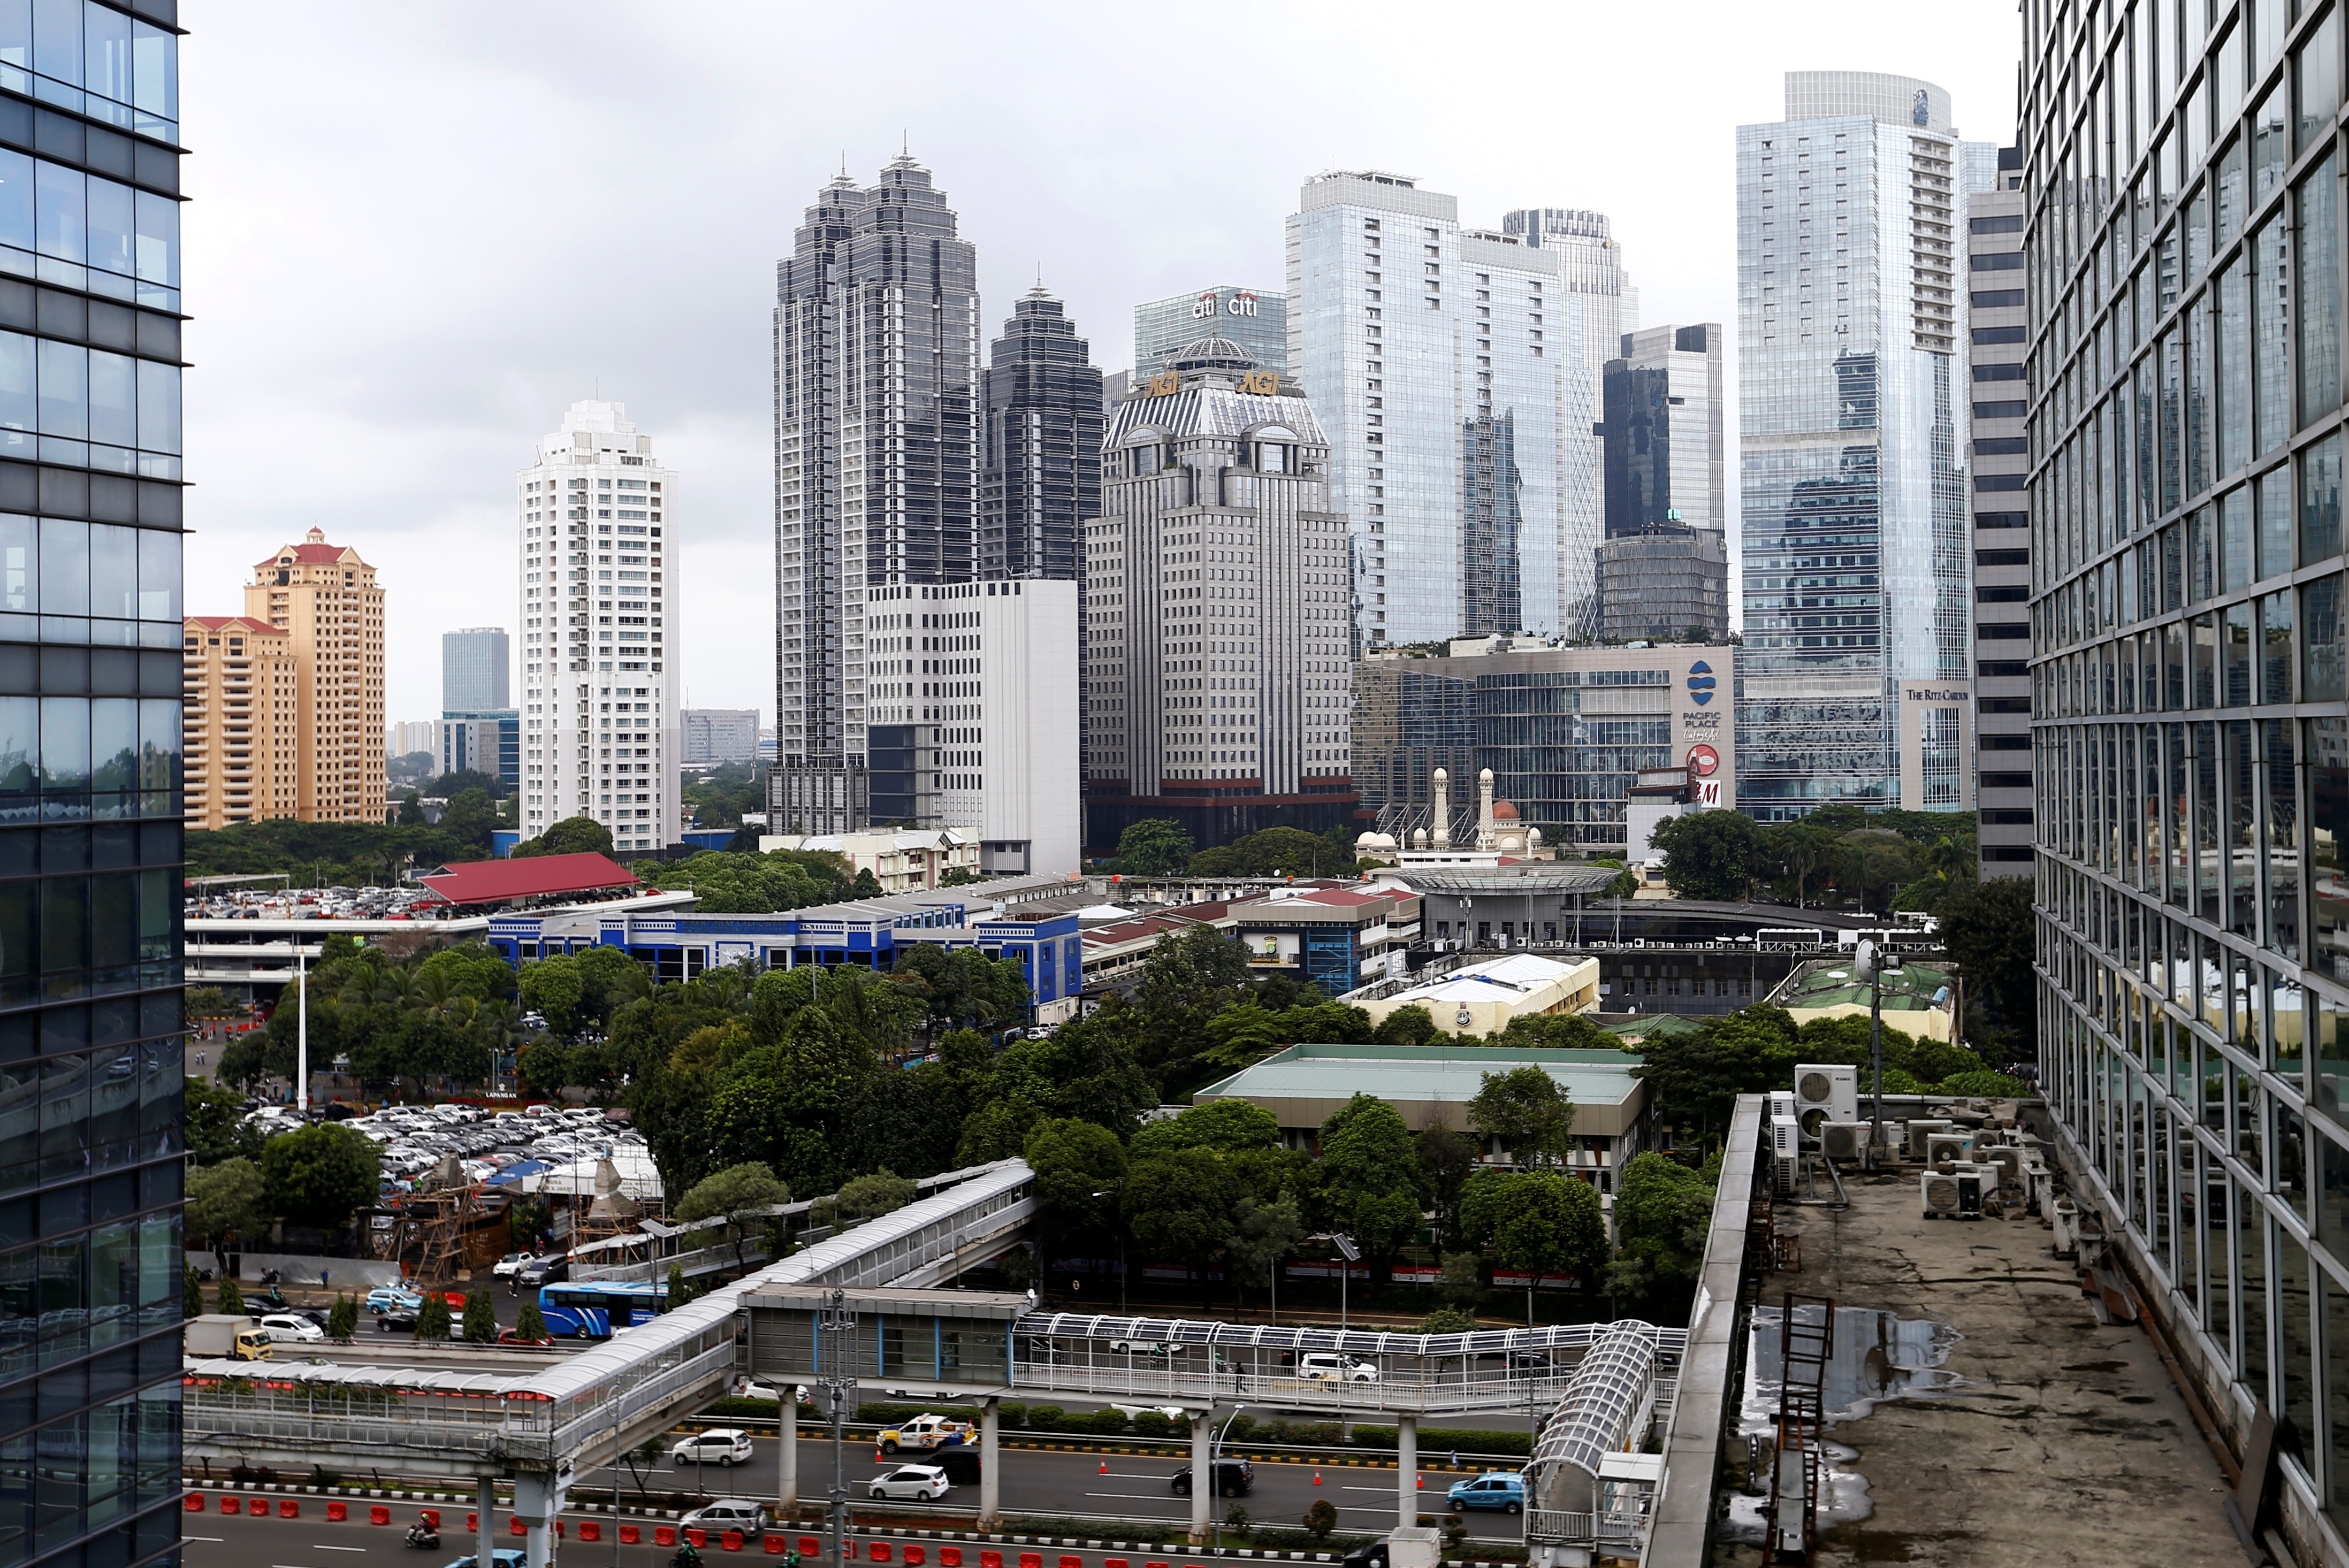 General view of Sudirman Central Business District (SCBD), following the coronavirus disease (COVID-19) outbreak, in Jakarta, Indonesia, February 5, 2021. REUTERS/Ajeng Dinar Ulfiana